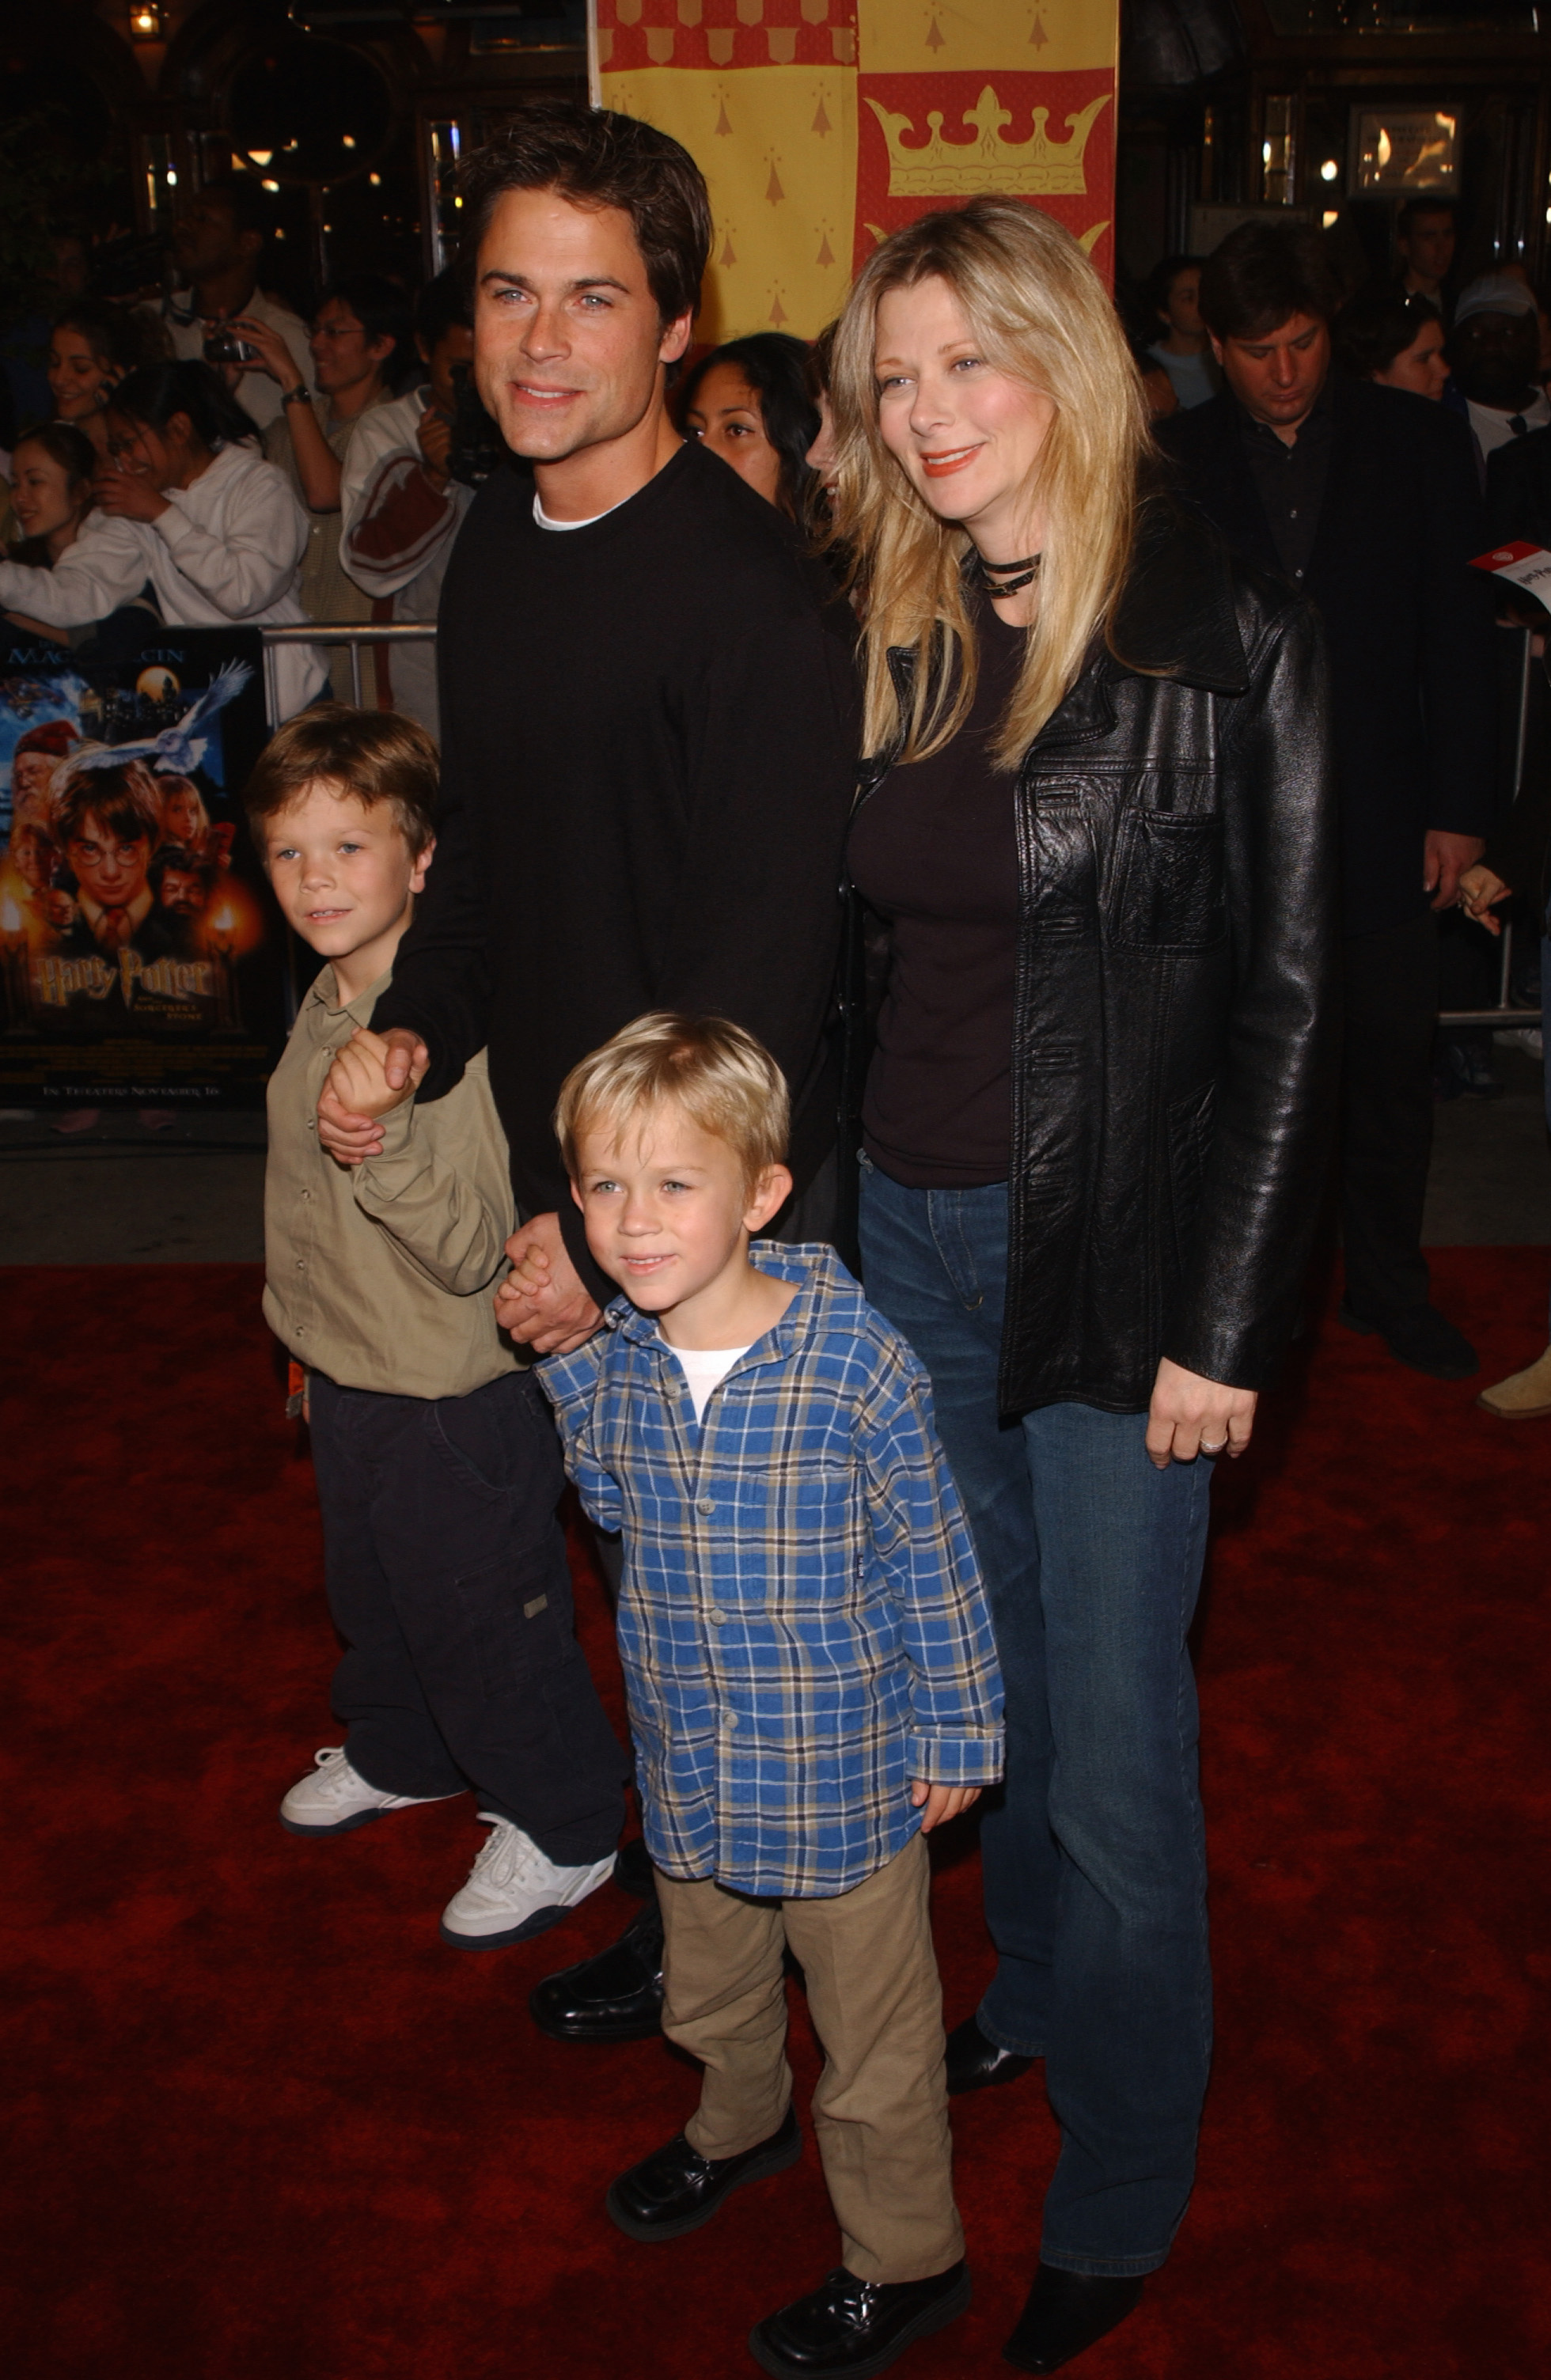 Rob Lowe and wife Sheryl Berkoff with their sons Matthew Edward Lowe and John Owen Lowe | Source: Getty Images